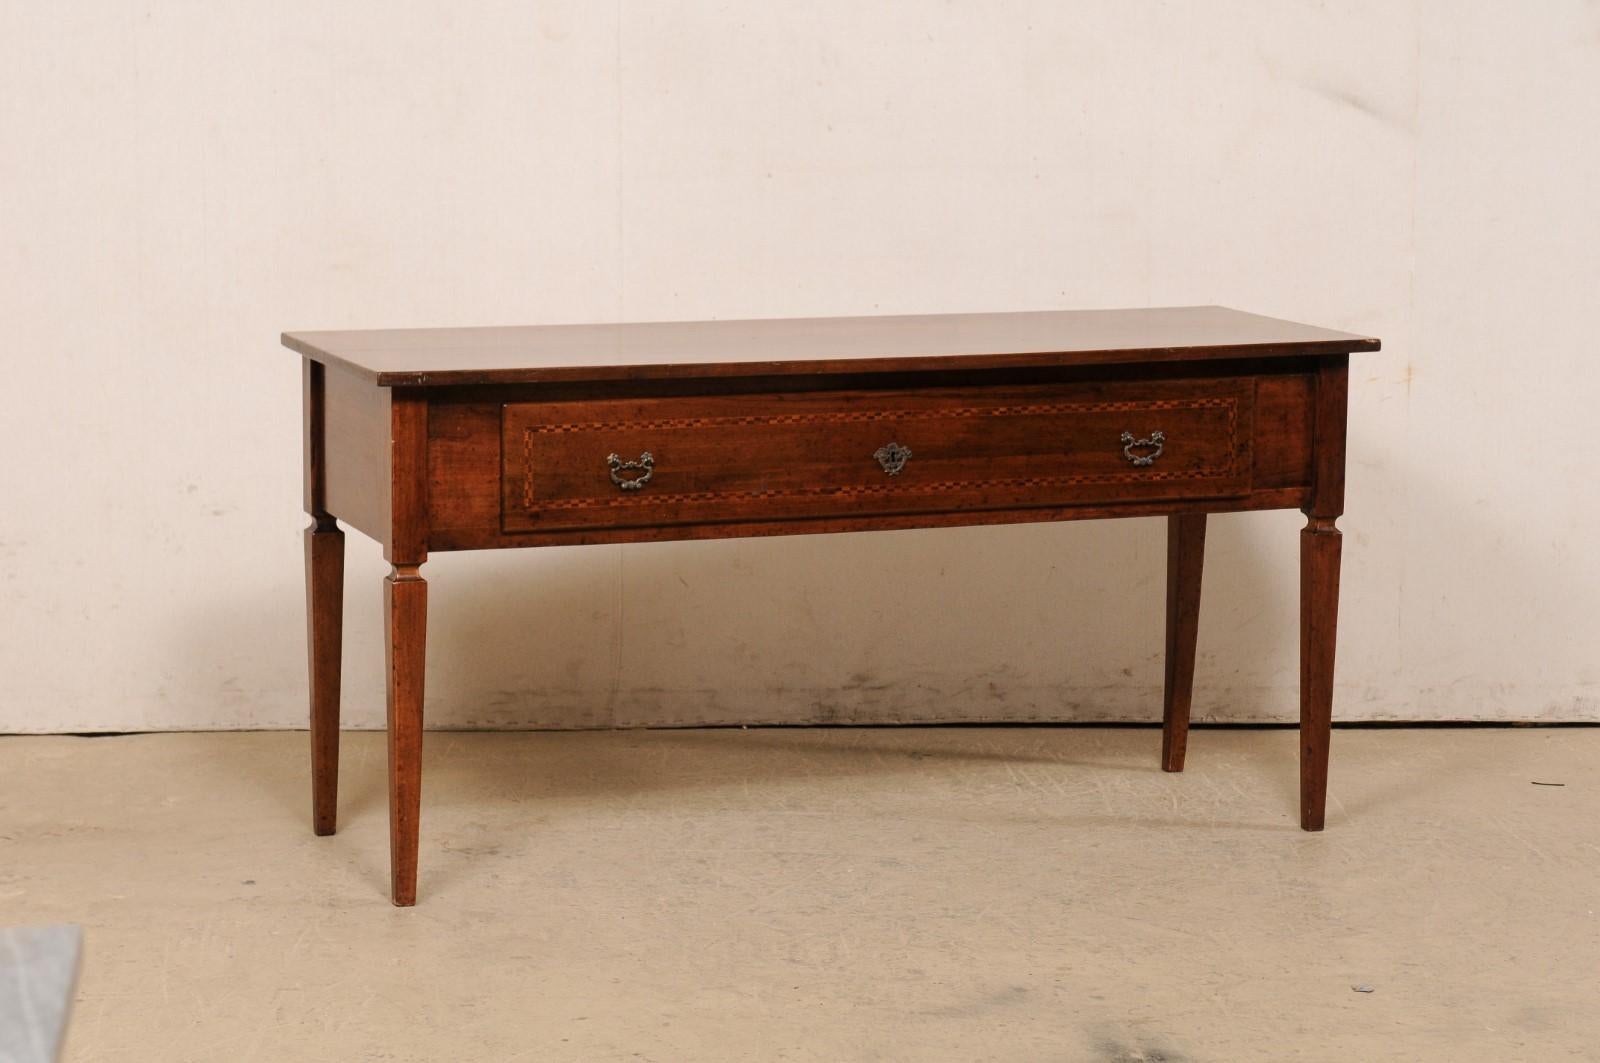 An Italian bench-made wooden console table with drawer from the mid-20th century. This midcentury table from Italy is approximately 5.25 feet in length, with rectangular top over a deep-set apron that houses a single large drawer (fitted with a pair